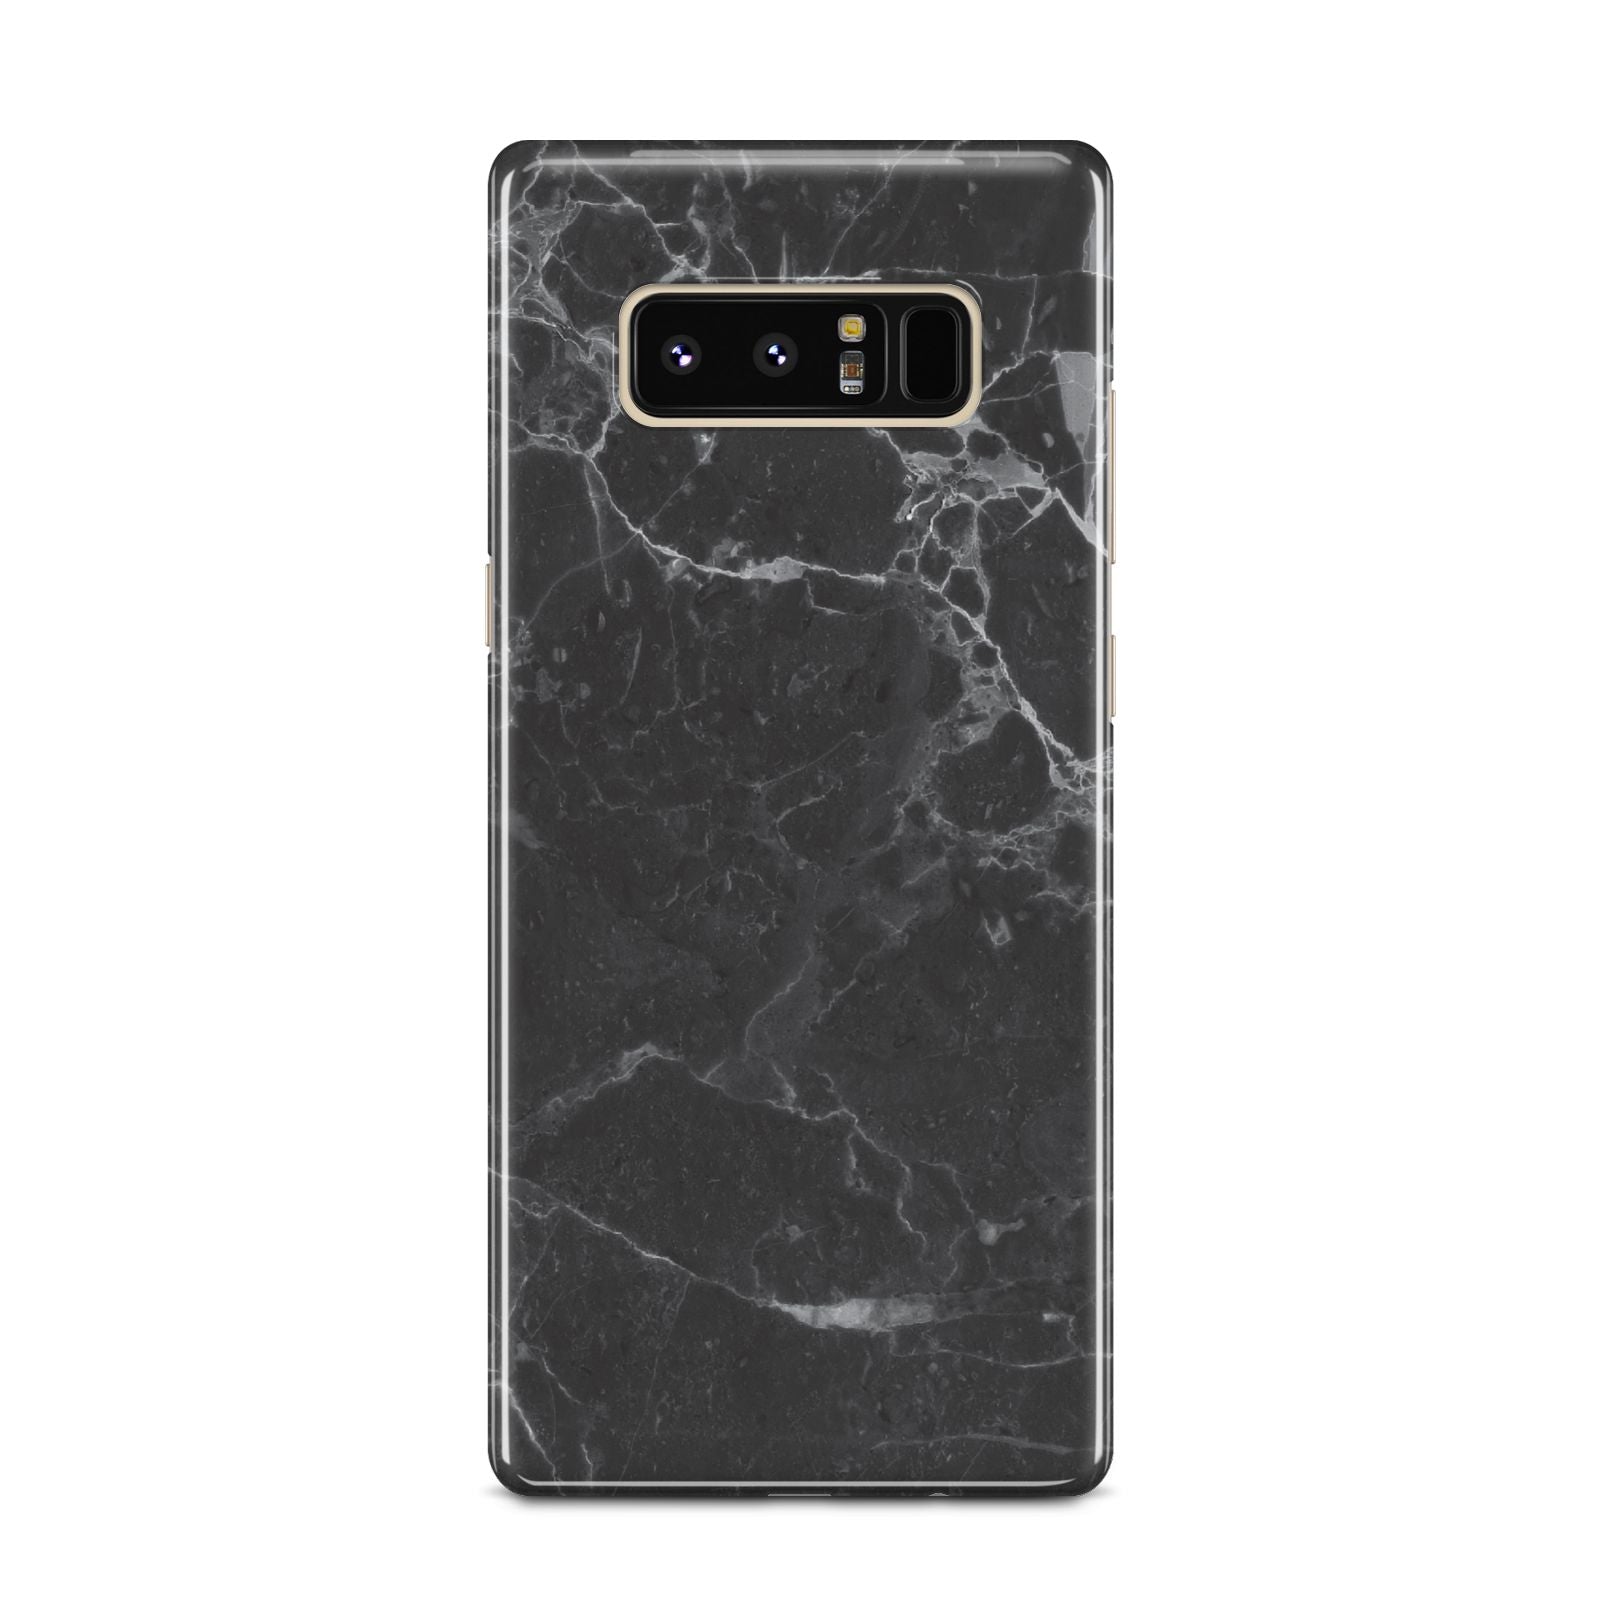 Faux Marble Effect Black Samsung Galaxy Note 8 Case